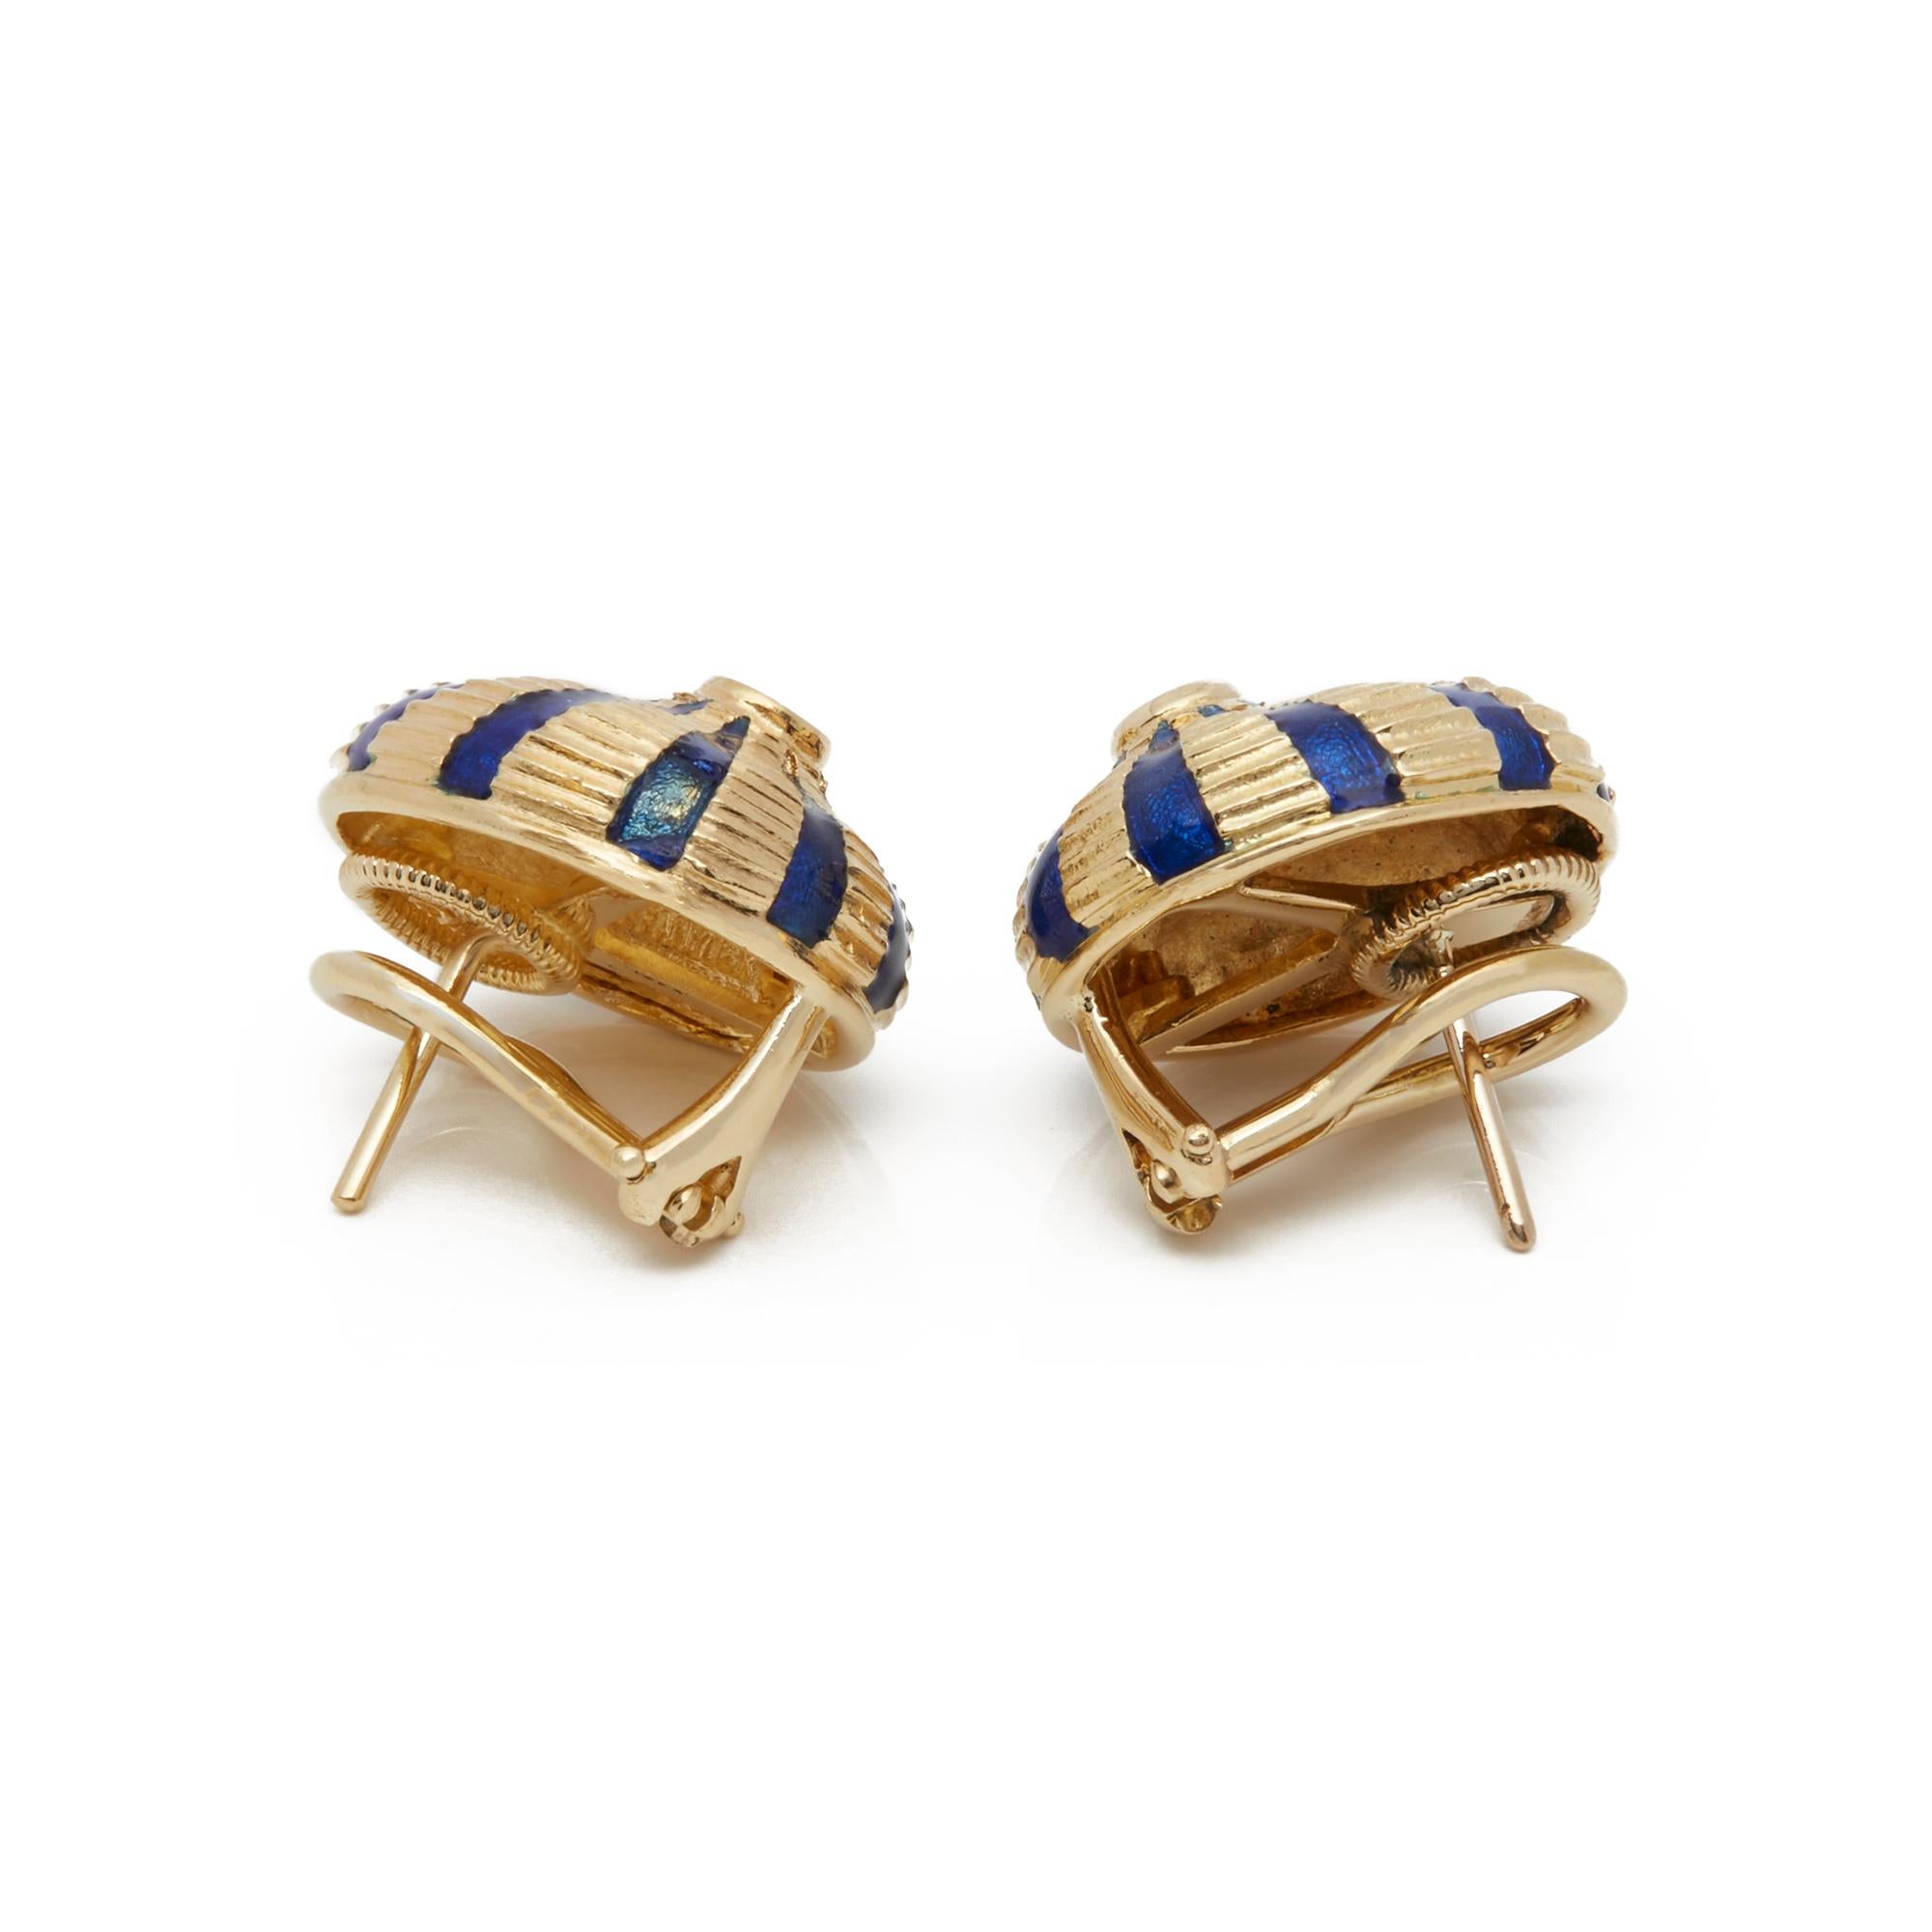 These Earrings by Tiffany & Co are from their Schlumberger Collection and features two Round Brilliant Cut Diamonds in a Rub Over Setting with Blue Enamel Banding, mounted in an 18k Yellow Gold Setting. Complete with Xupes Presentation Box. Our